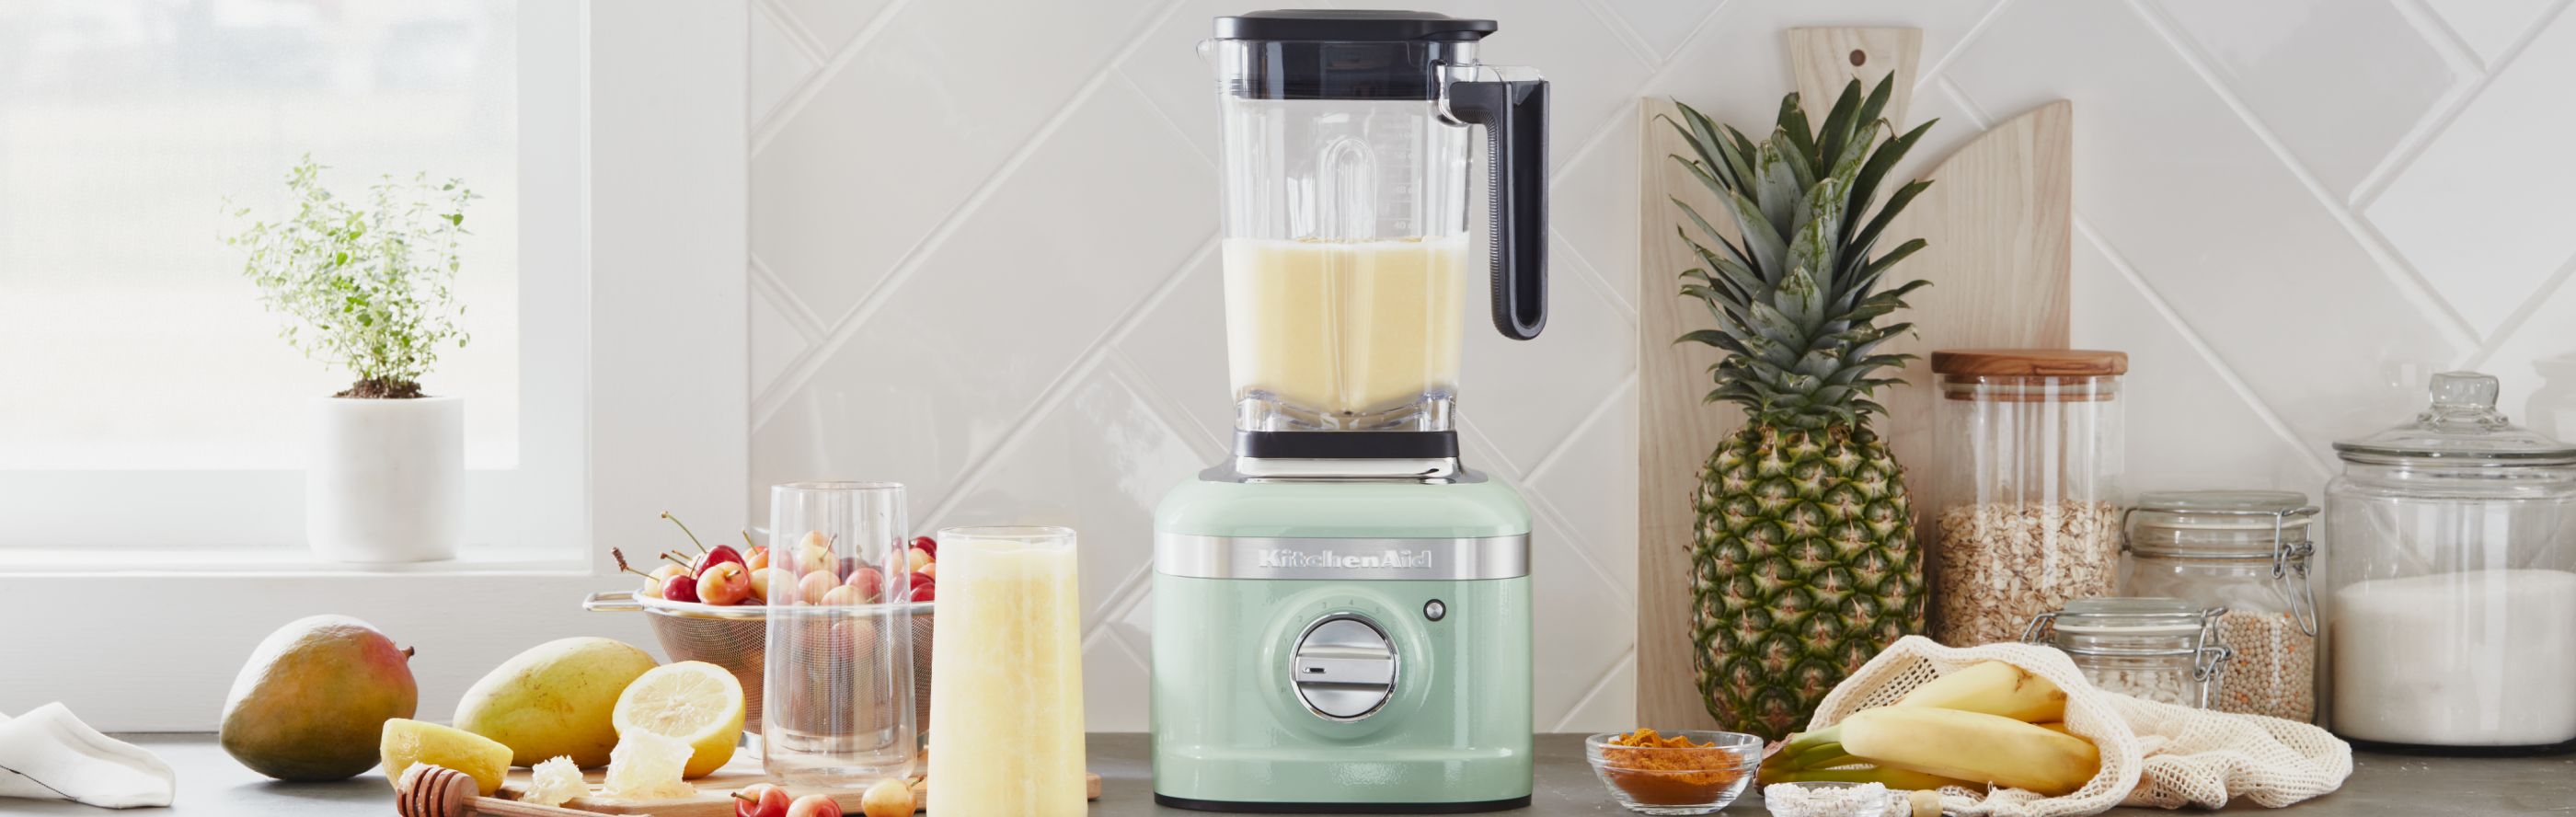 lol syre arv 3 Types of Blenders: A Buying Guide | KitchenAid